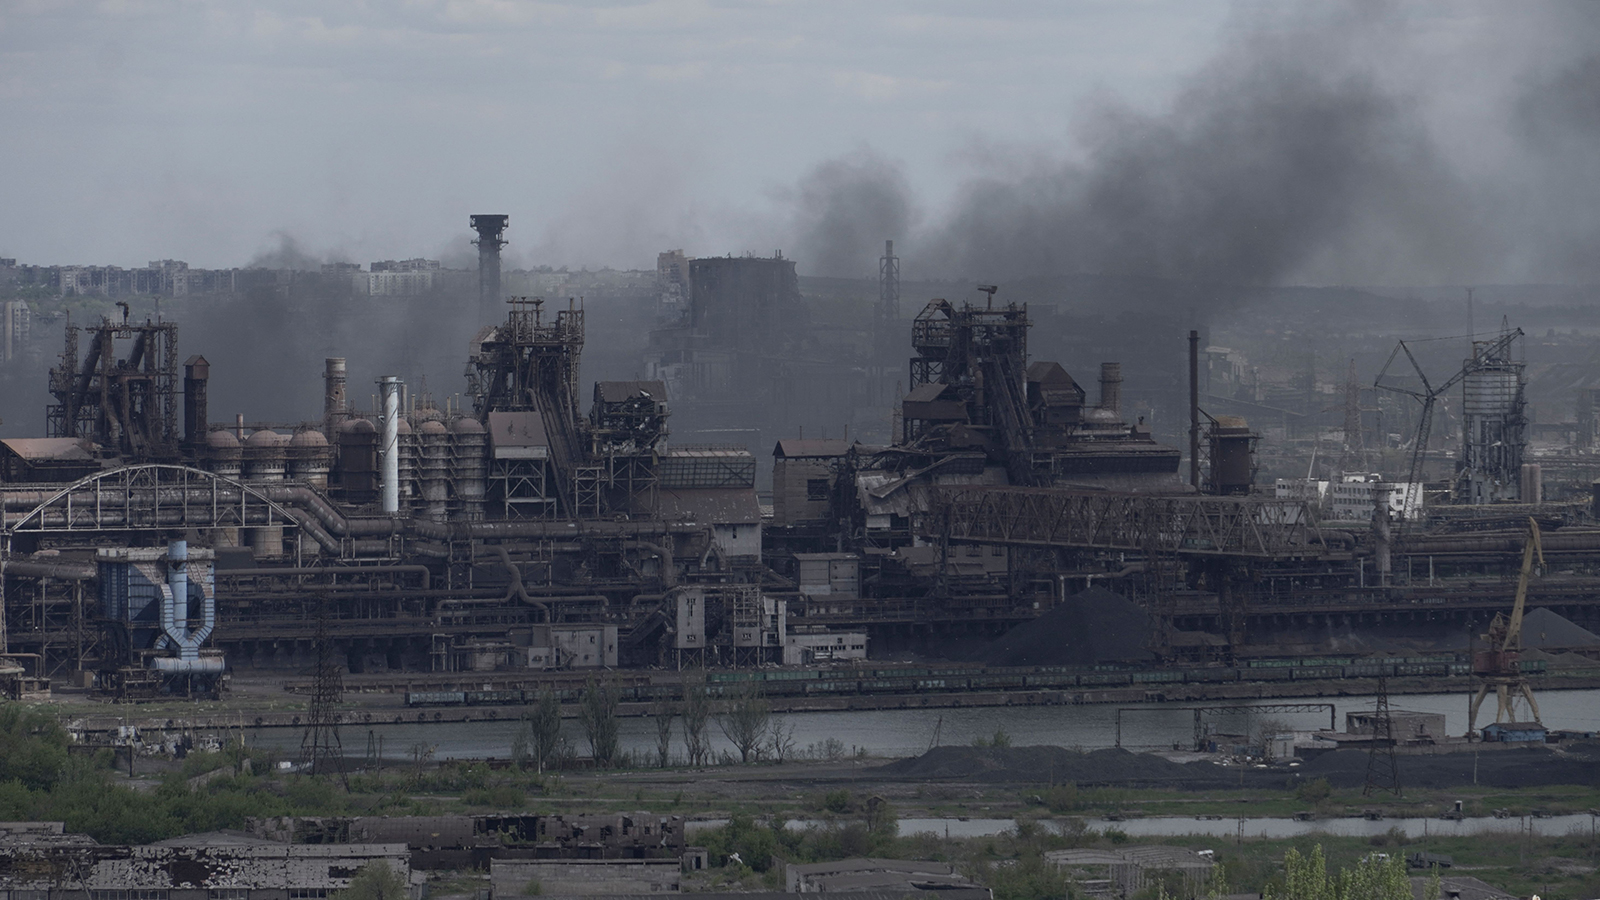 A view shows the Azovstal steel plant in the city of Mariupol on May 10, amid the ongoing Russian military action in Ukraine. 